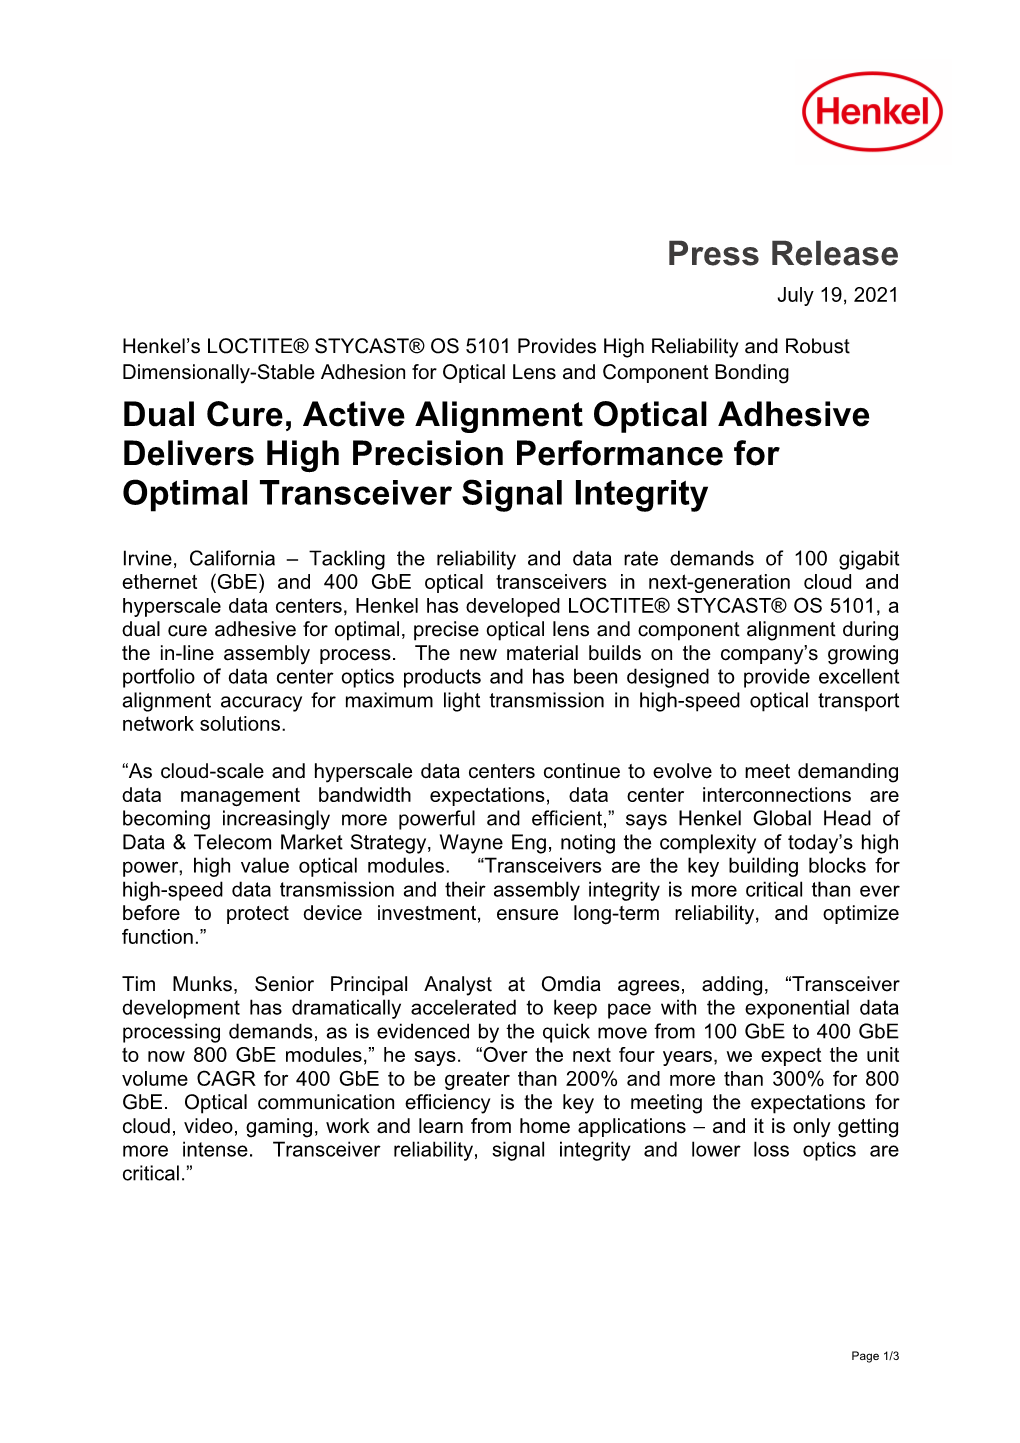 Press Release Dual Cure, Active Alignment Optical Adhesive